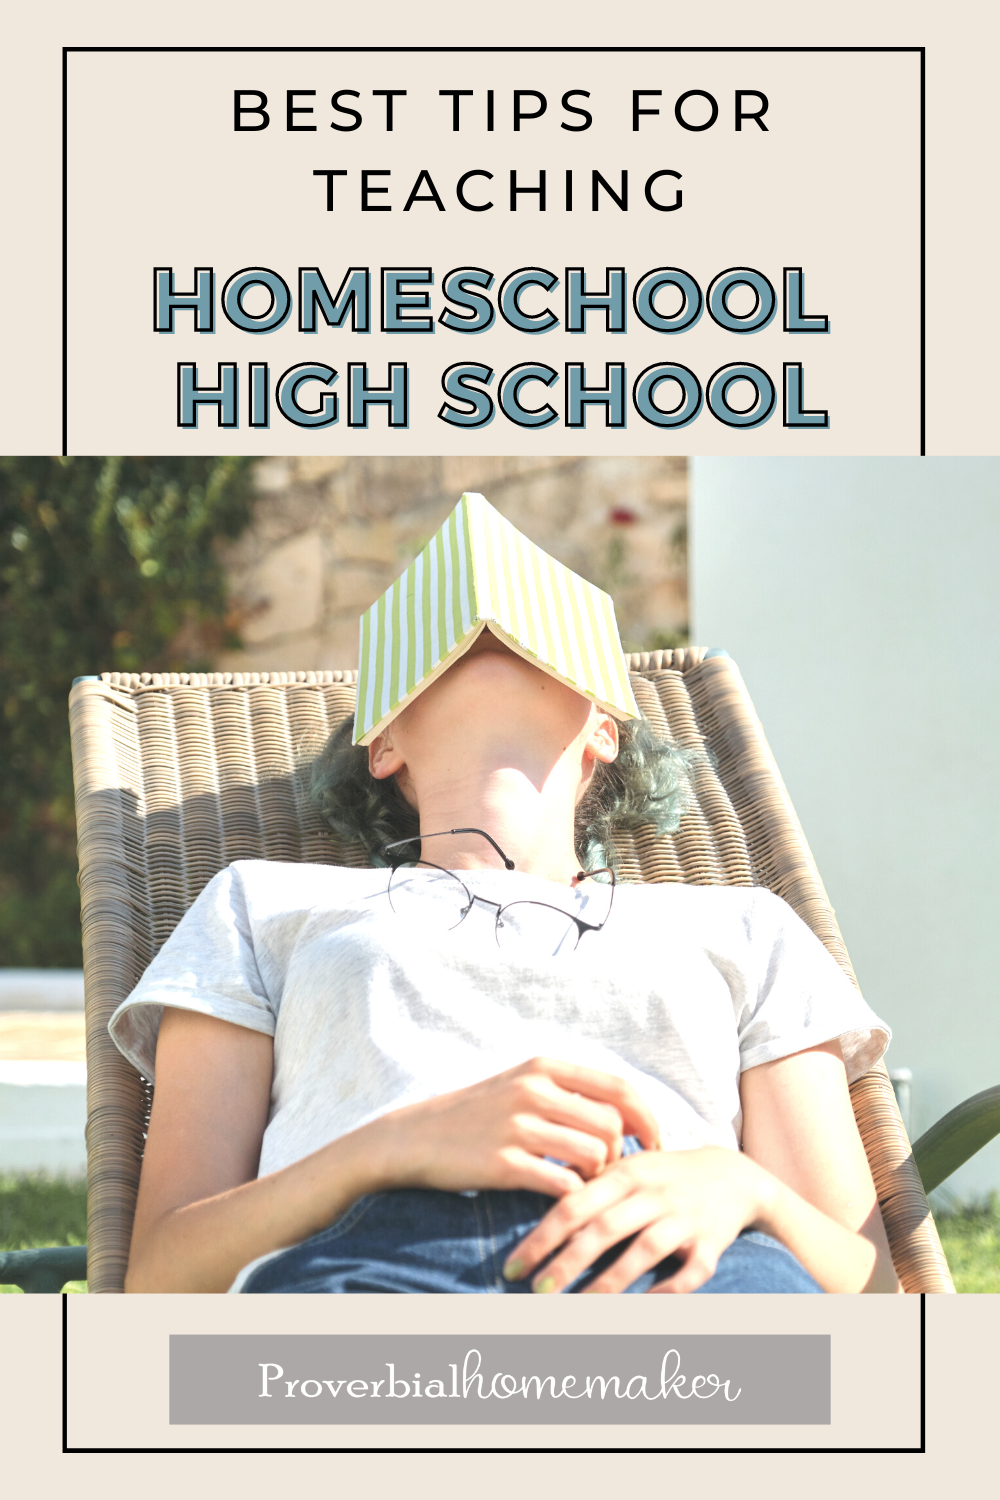 Best tips for teaching homeschool high school, including teaching tips as their parent, homeschool high school planning and vision, and more!